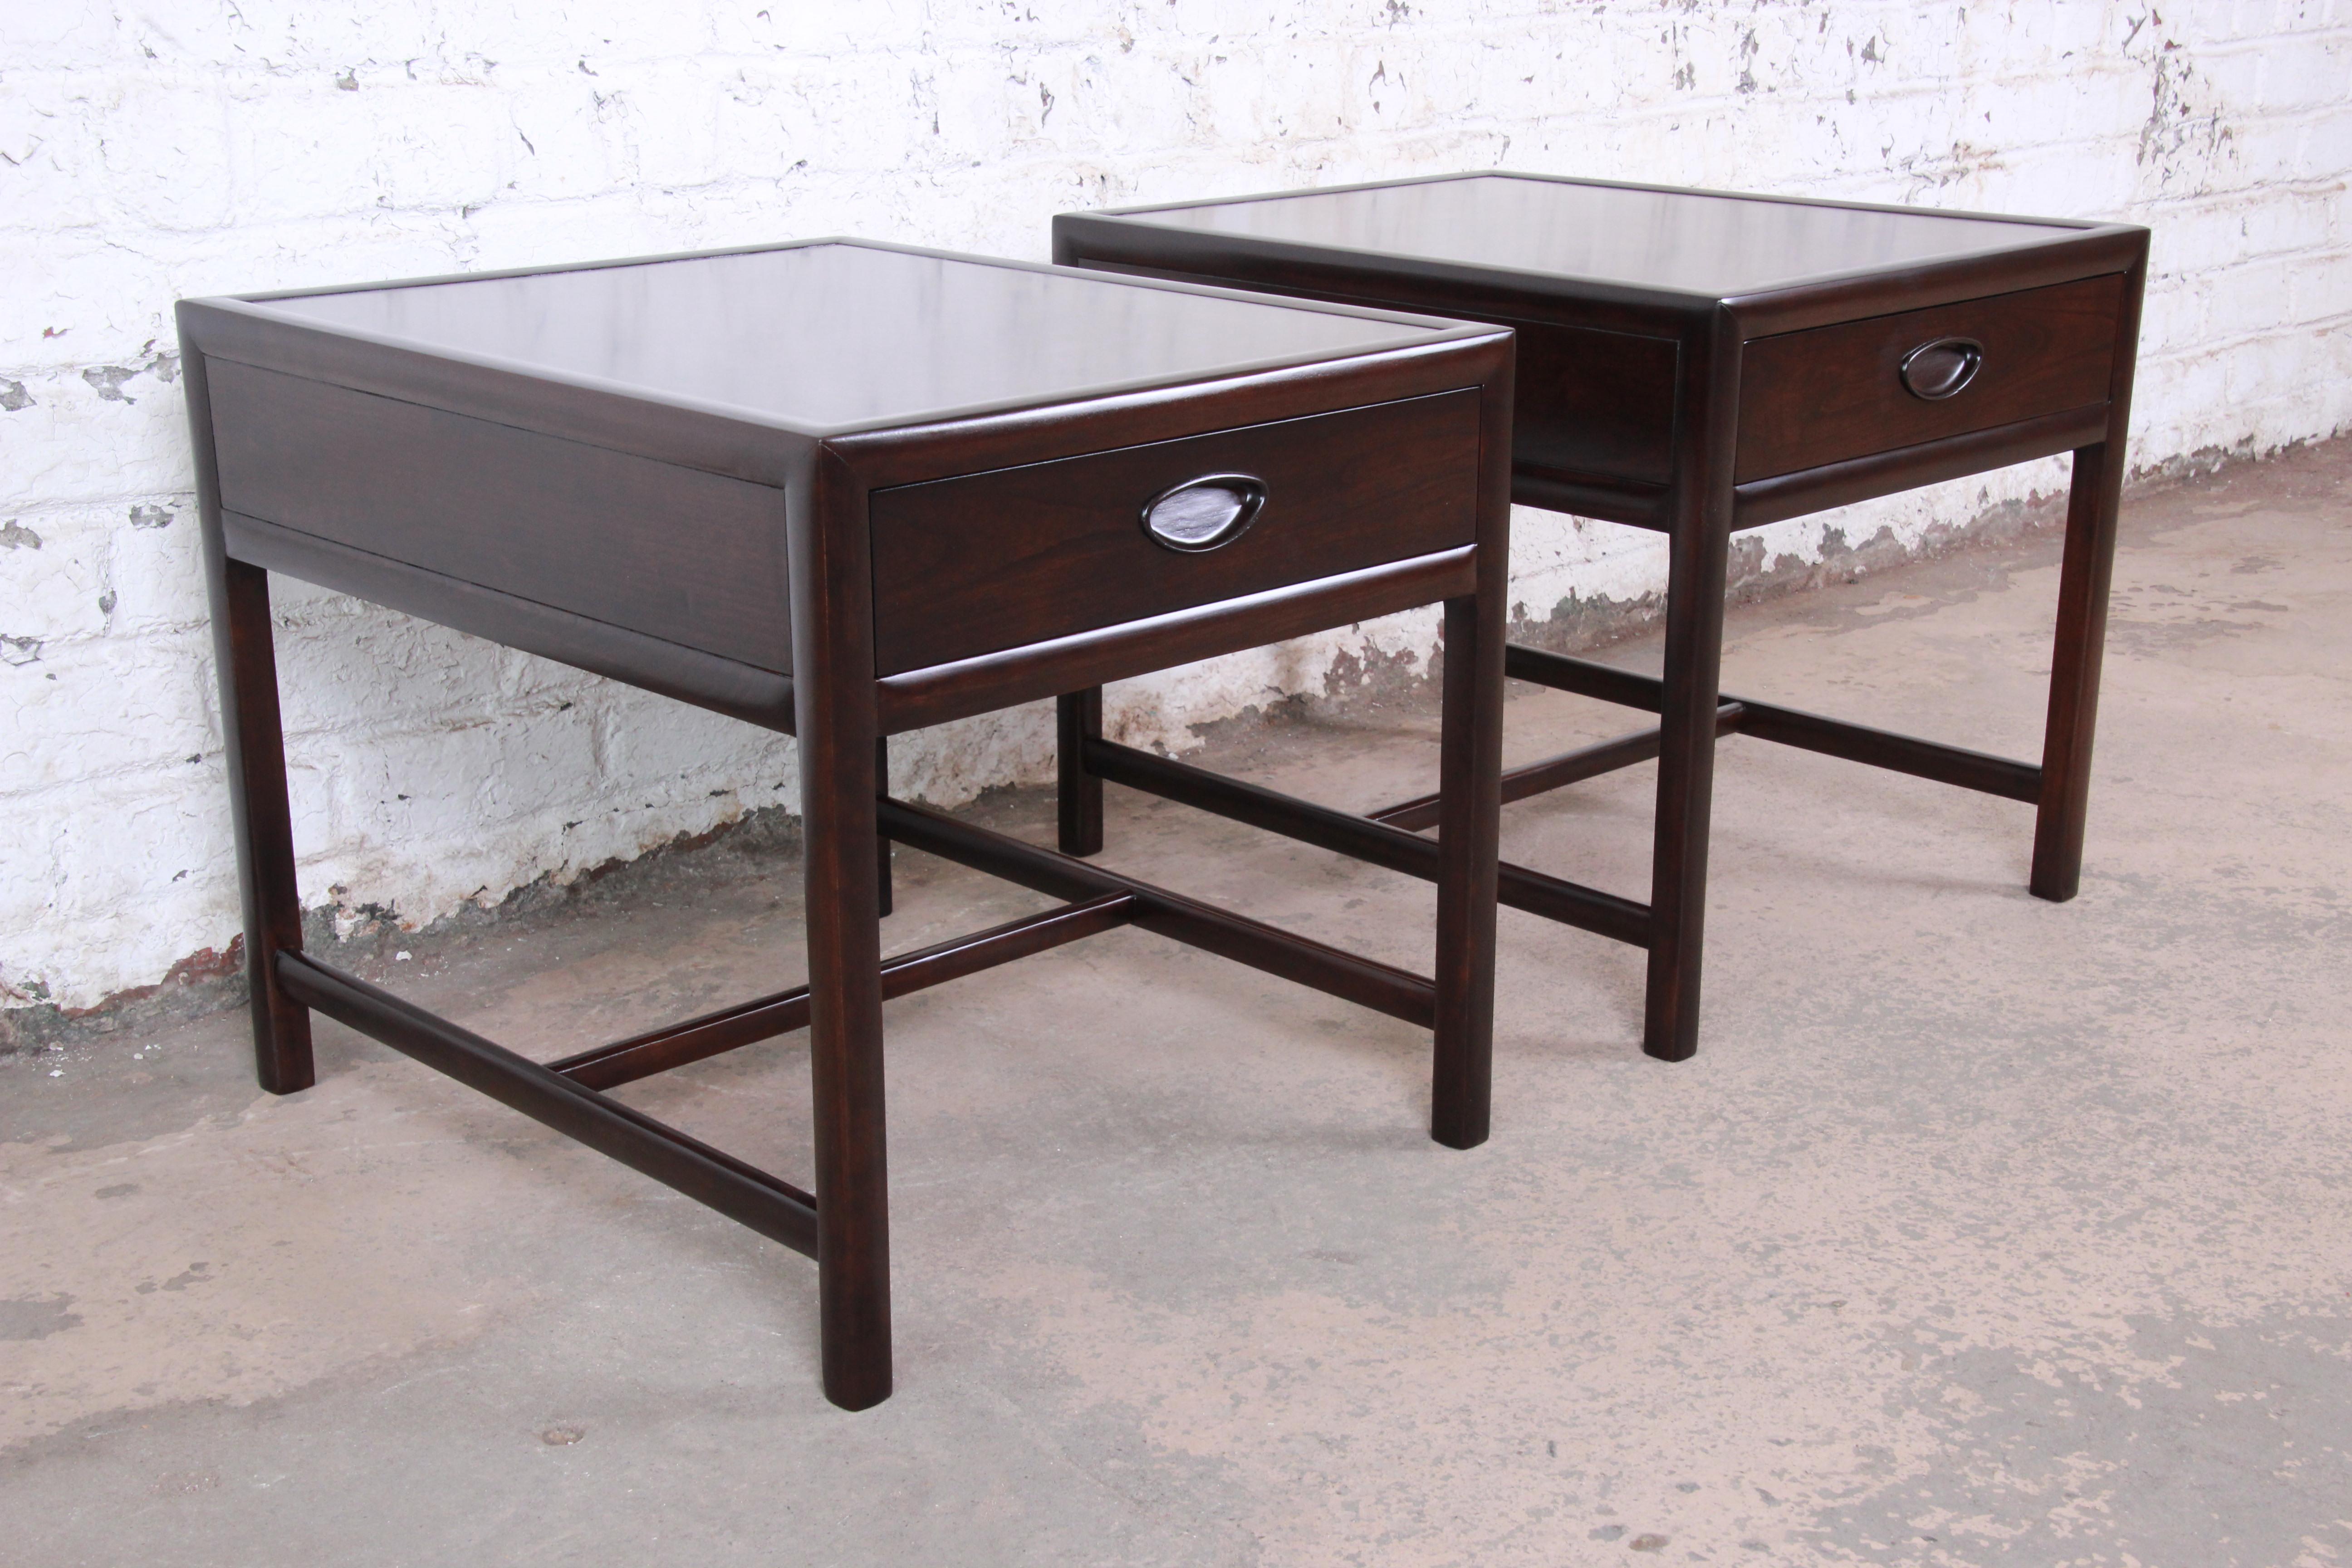 An exceptional pair of Mid-Century Modern dark cherry nightstands

Designed by Michael Taylor for his 